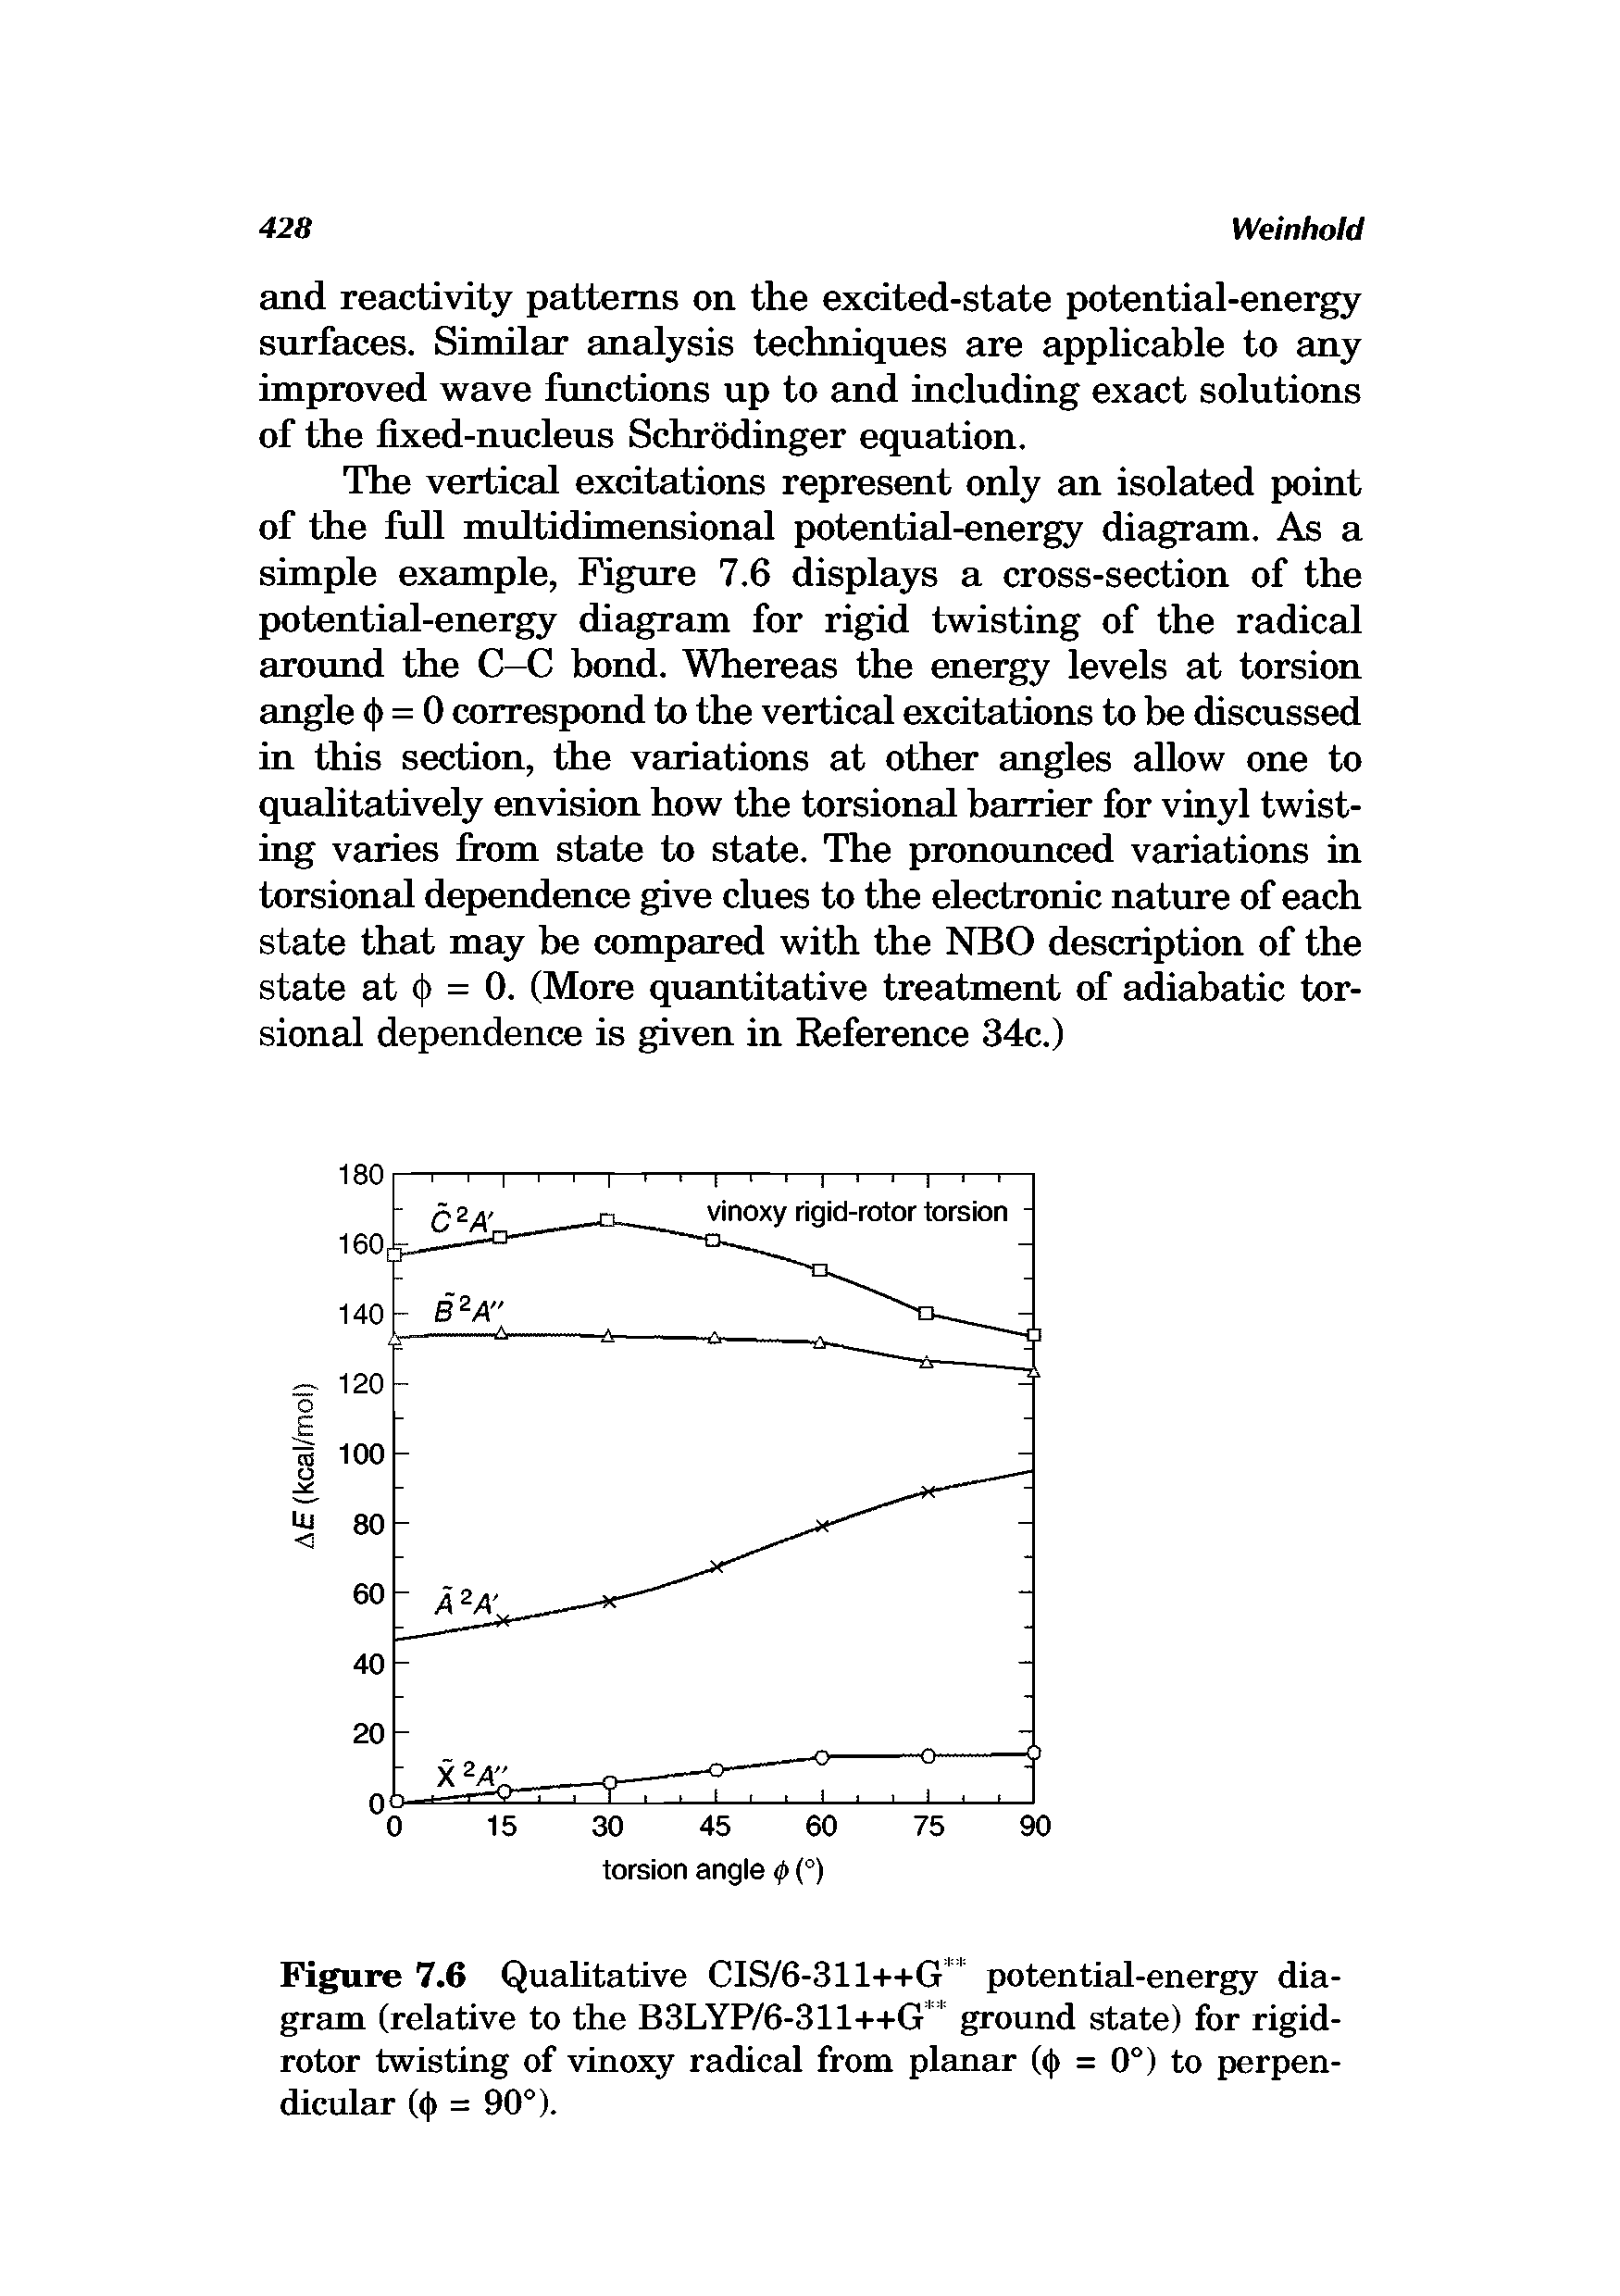 Figure 7.6 Qualitative CIS/6-311++G " potential-energy diagram (relative to the B3LYP/6-311++G " ground state) for rigid-rotor twisting of vinoxy radical from planar (( ) = 0°) to perpendicular (( ) = 90°).